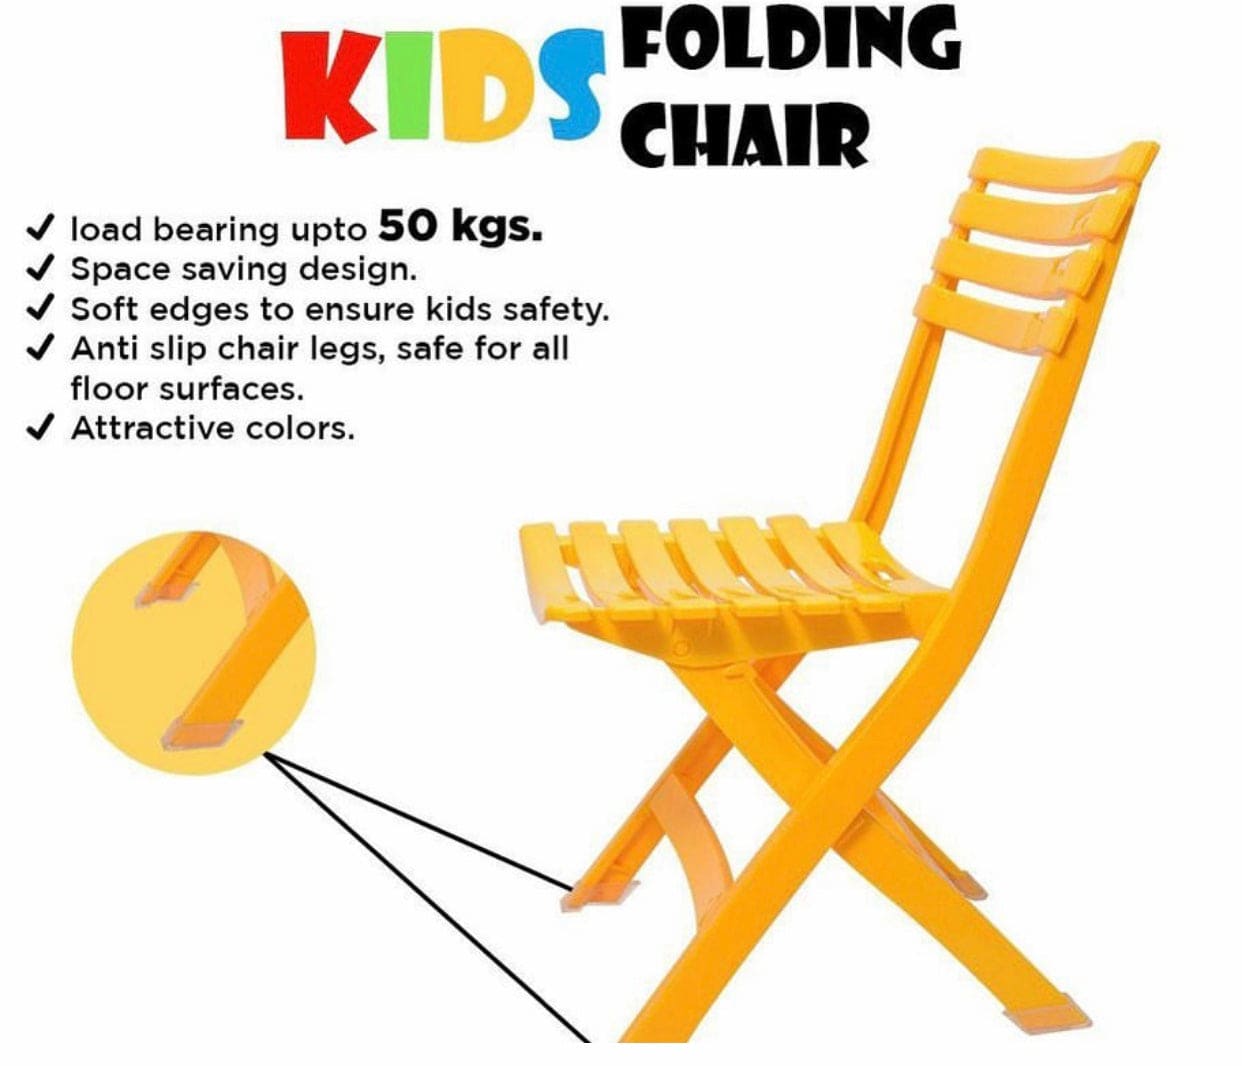 Kids Folding Chair, Outdoor Leisure Balcony Chair, Play Eating Coffee Table, Folding Garden Chair